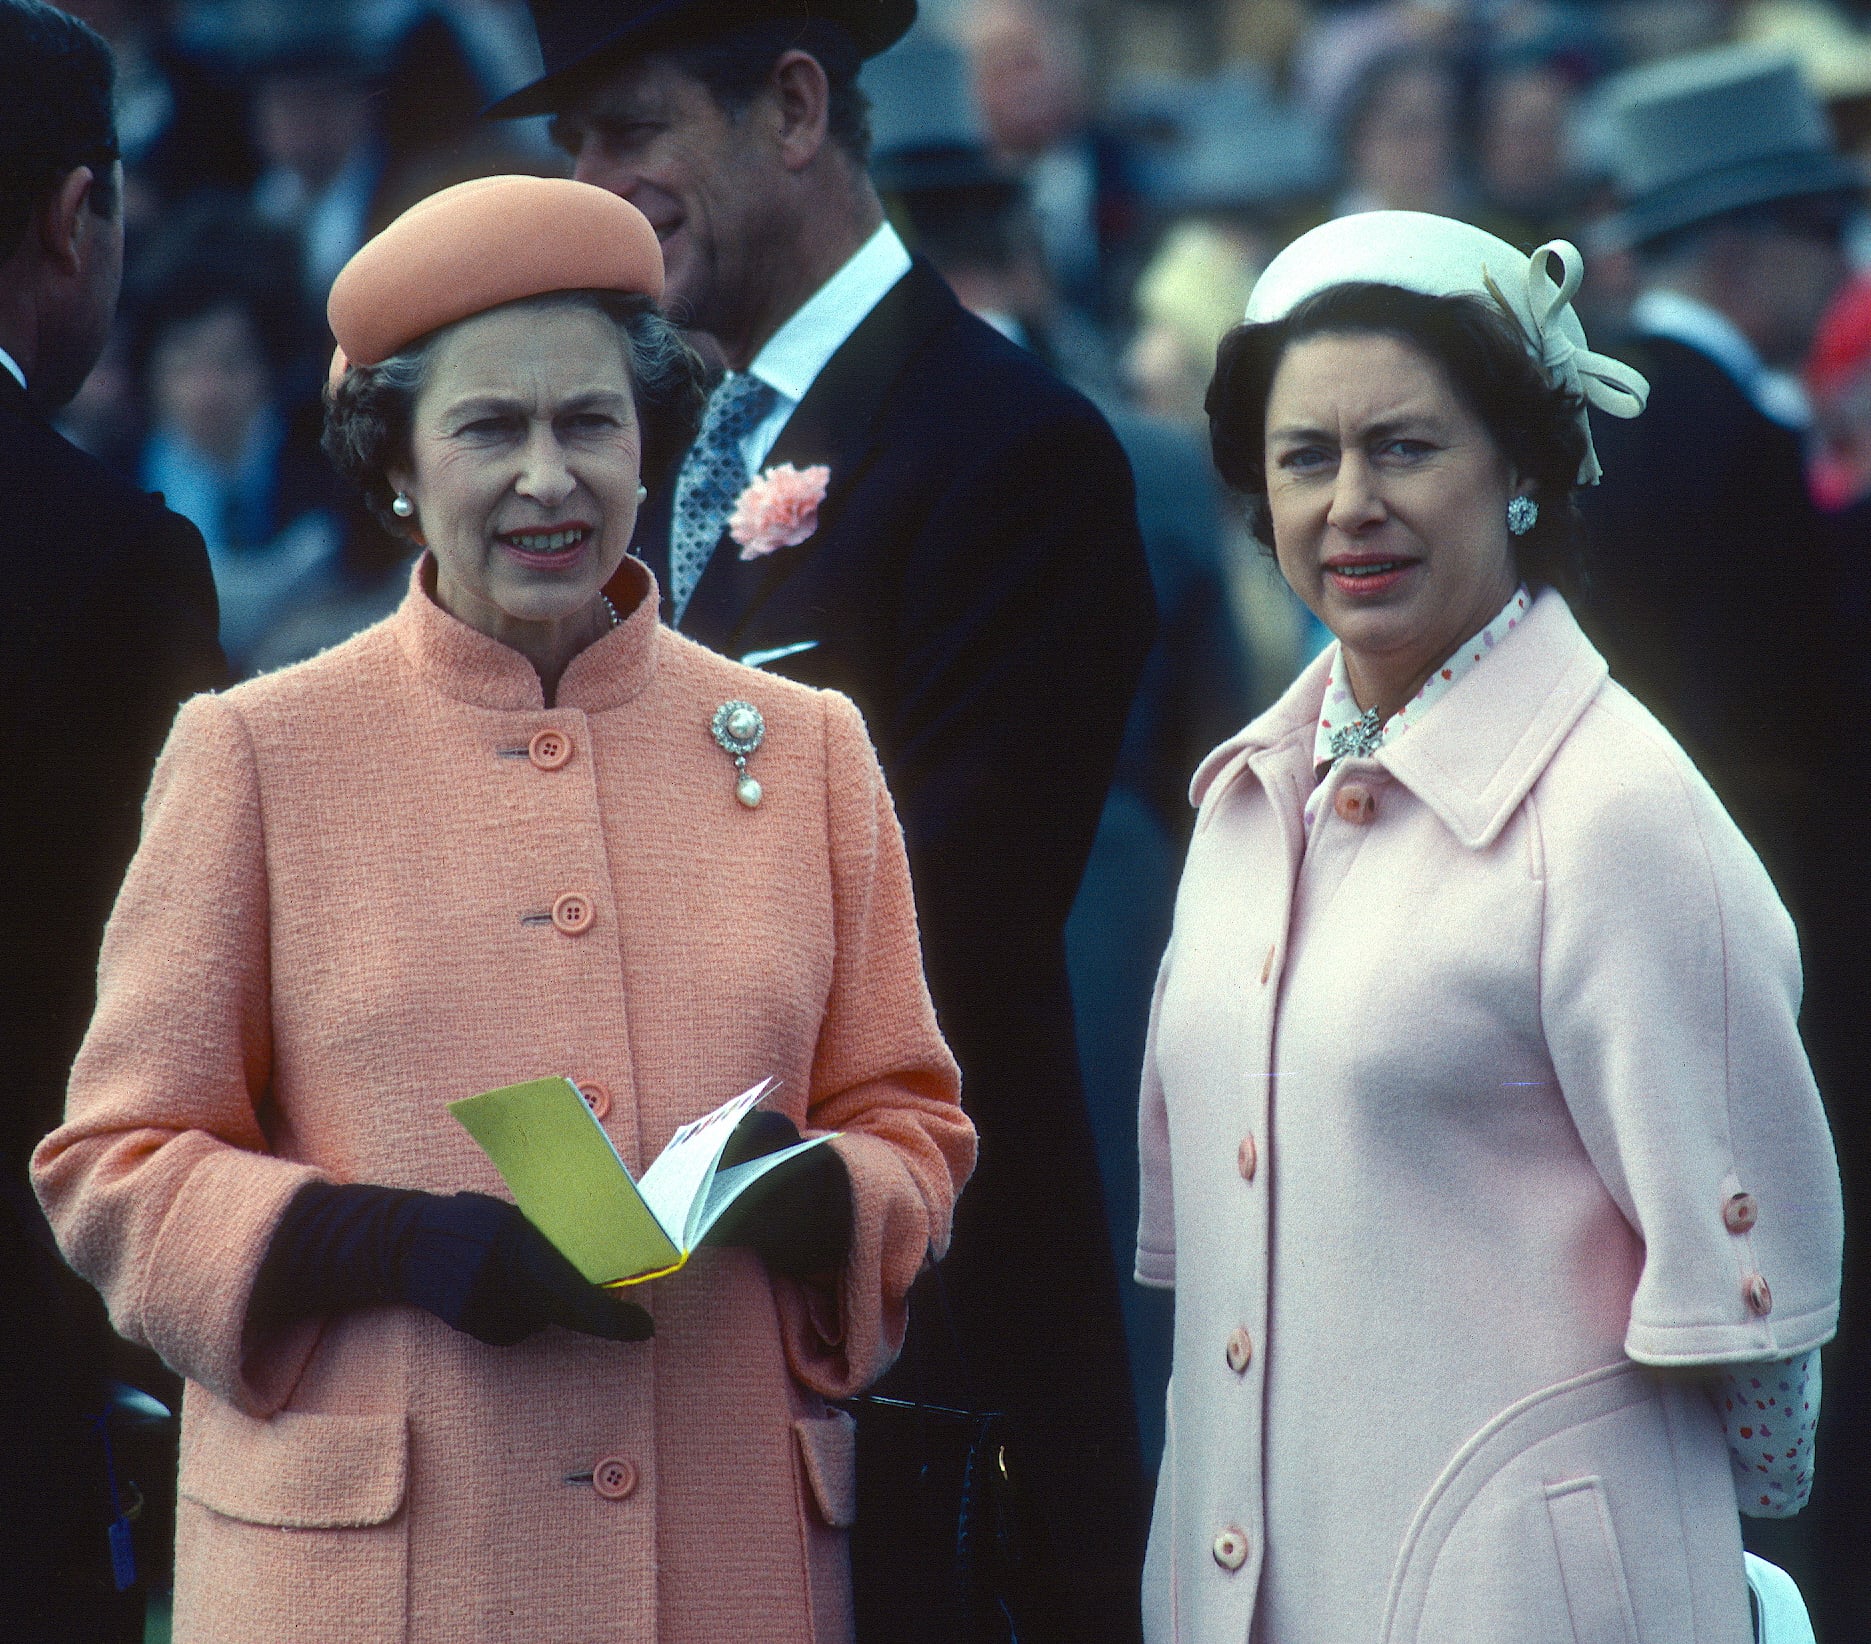 EPSOM, UNITED KINGDOM -JUNE 06:  Queen Elizabeth ll and her sister Princess Margaret attend the Epsom Derby on June 06, 1979 in Epsom,  England. (Photo by Anwar Hussein/Getty Images)